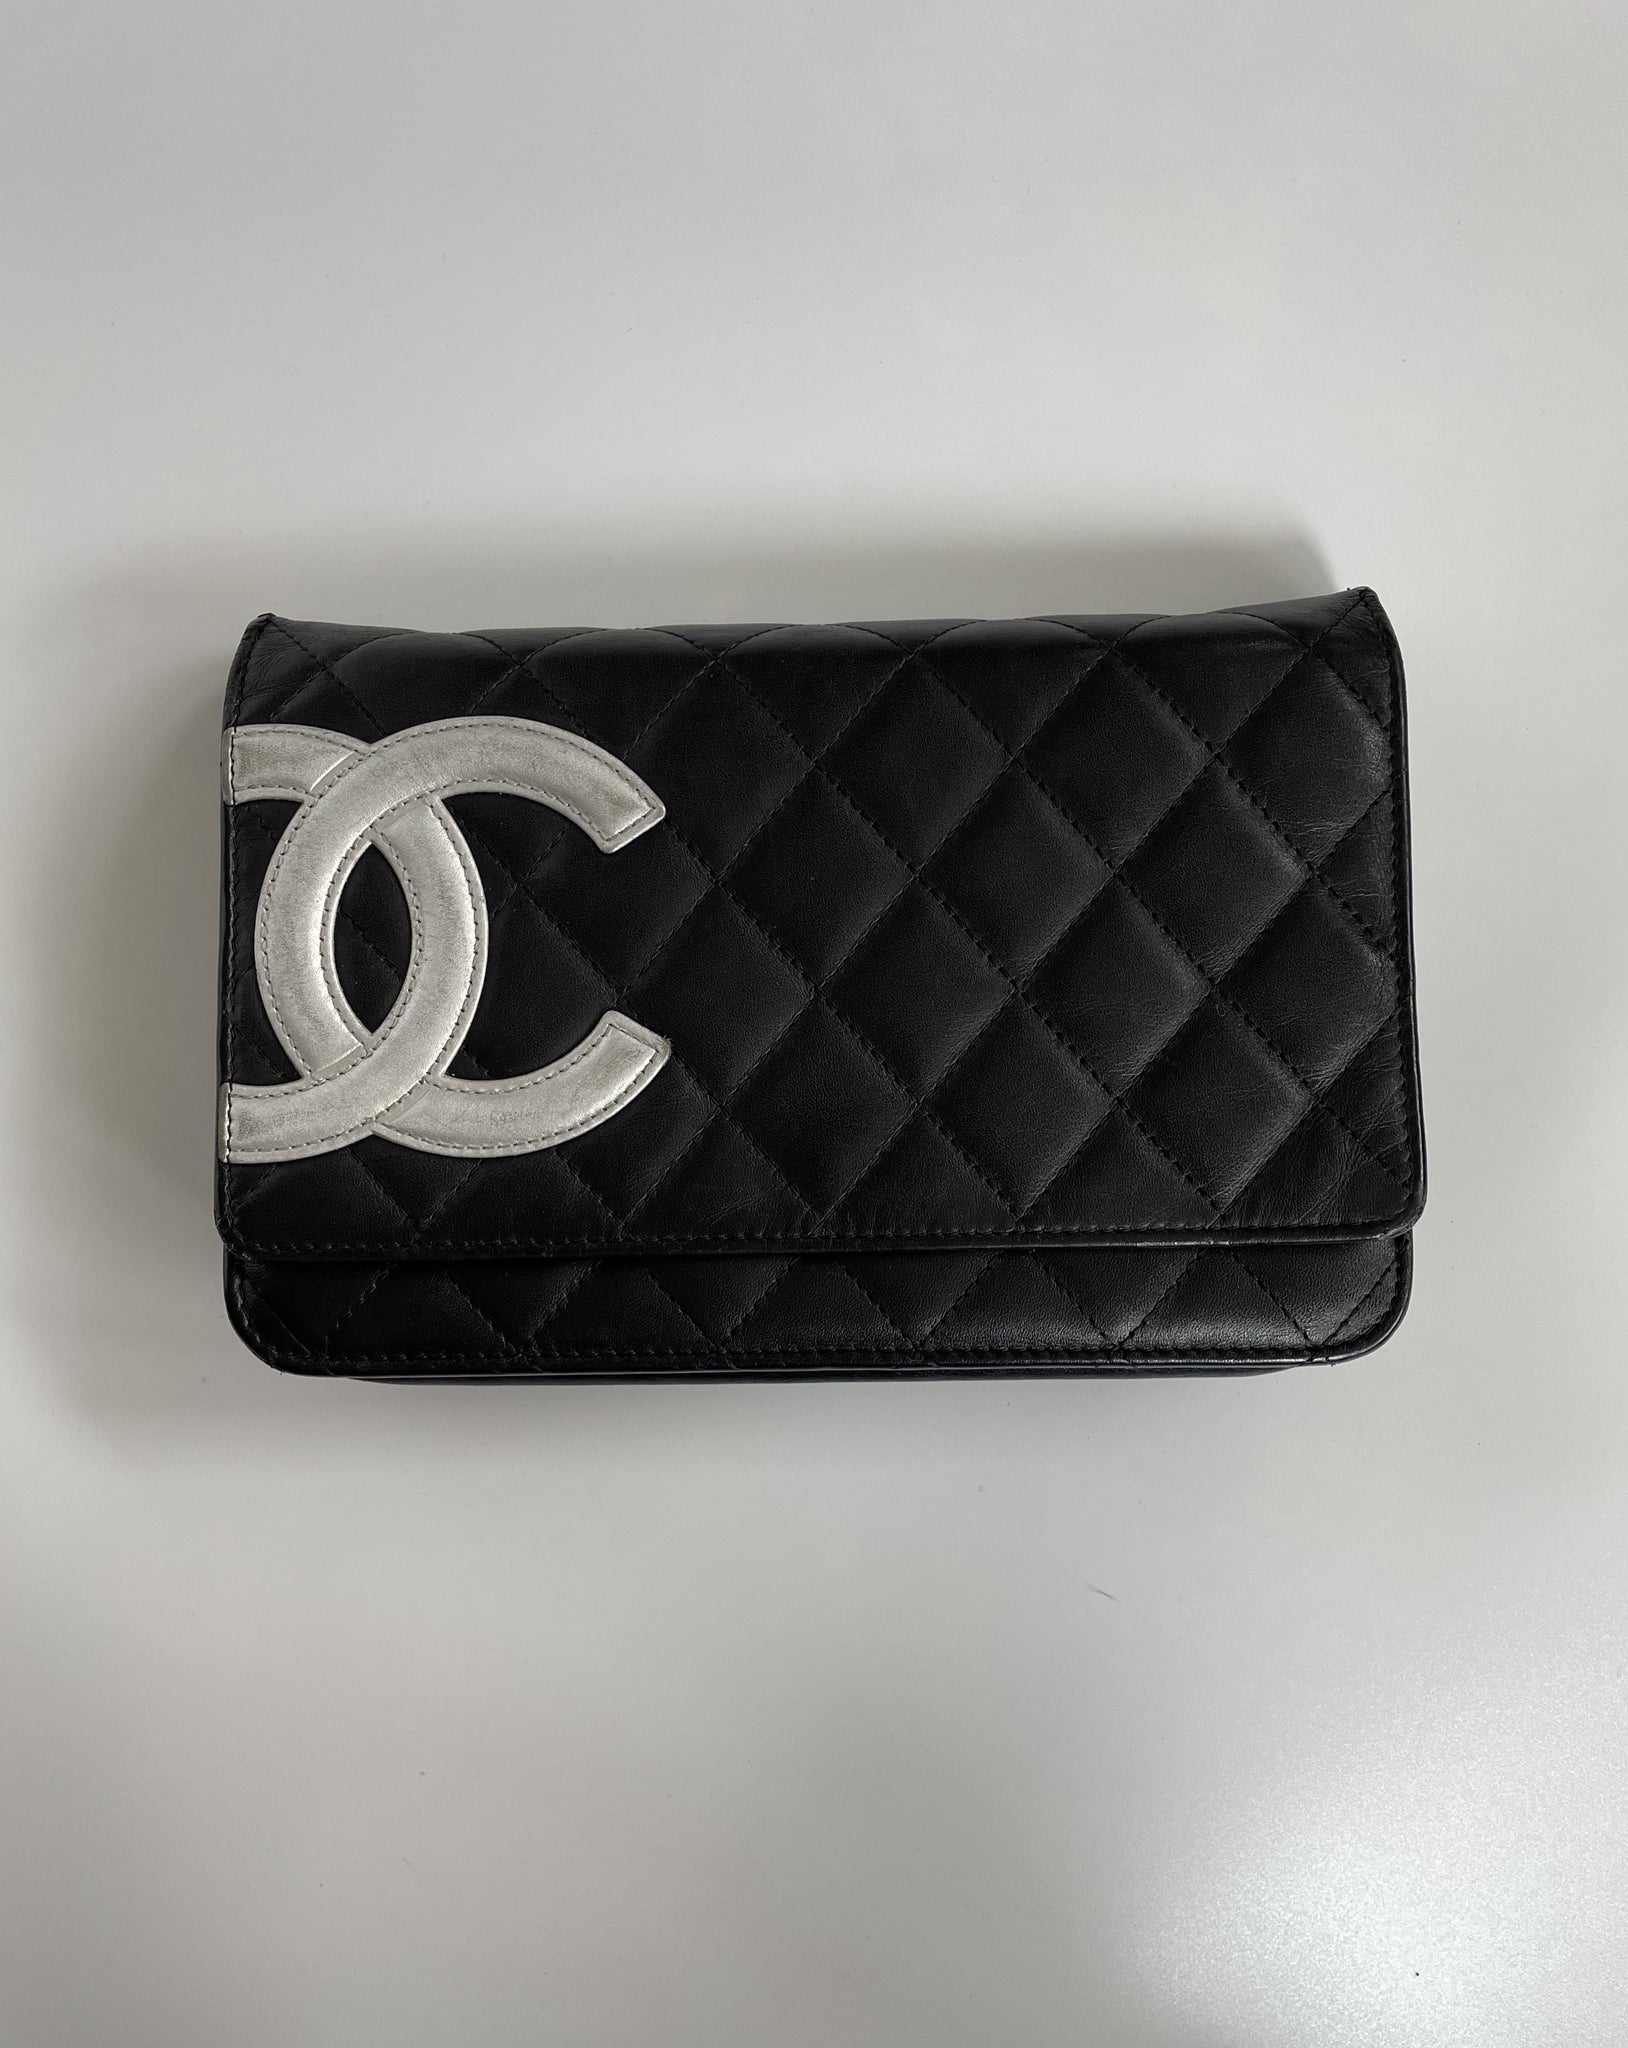 Chanel - Authenticated Cambon Wallet - Leather Black for Women, Very Good Condition